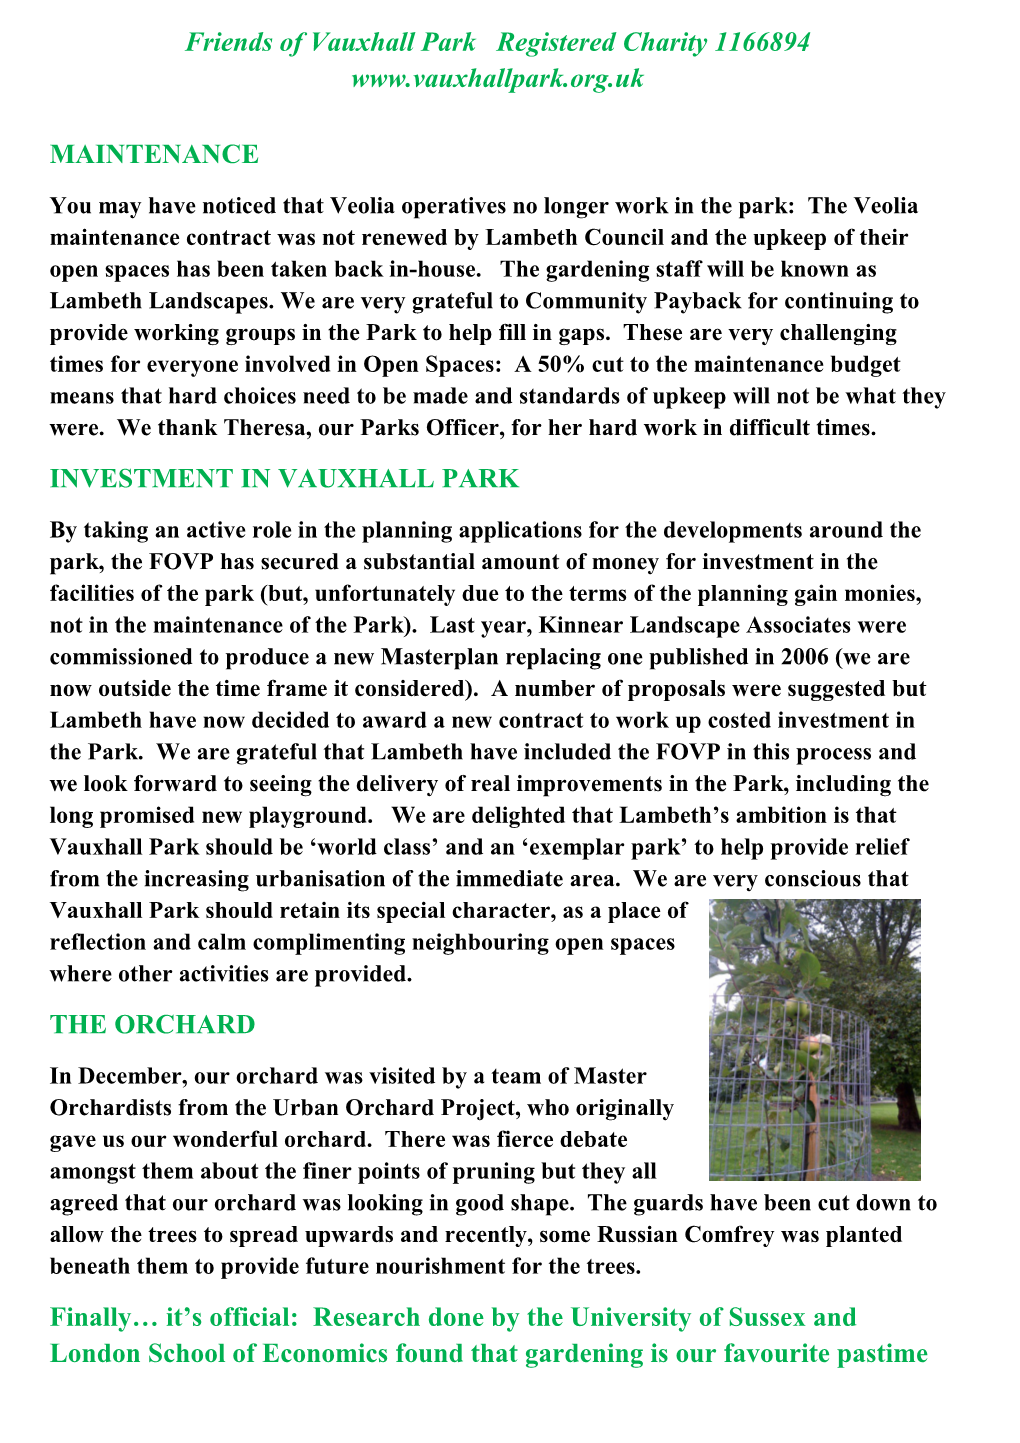 FRIENDS of VAUXHALL PARKNEWSLETTER No. 32